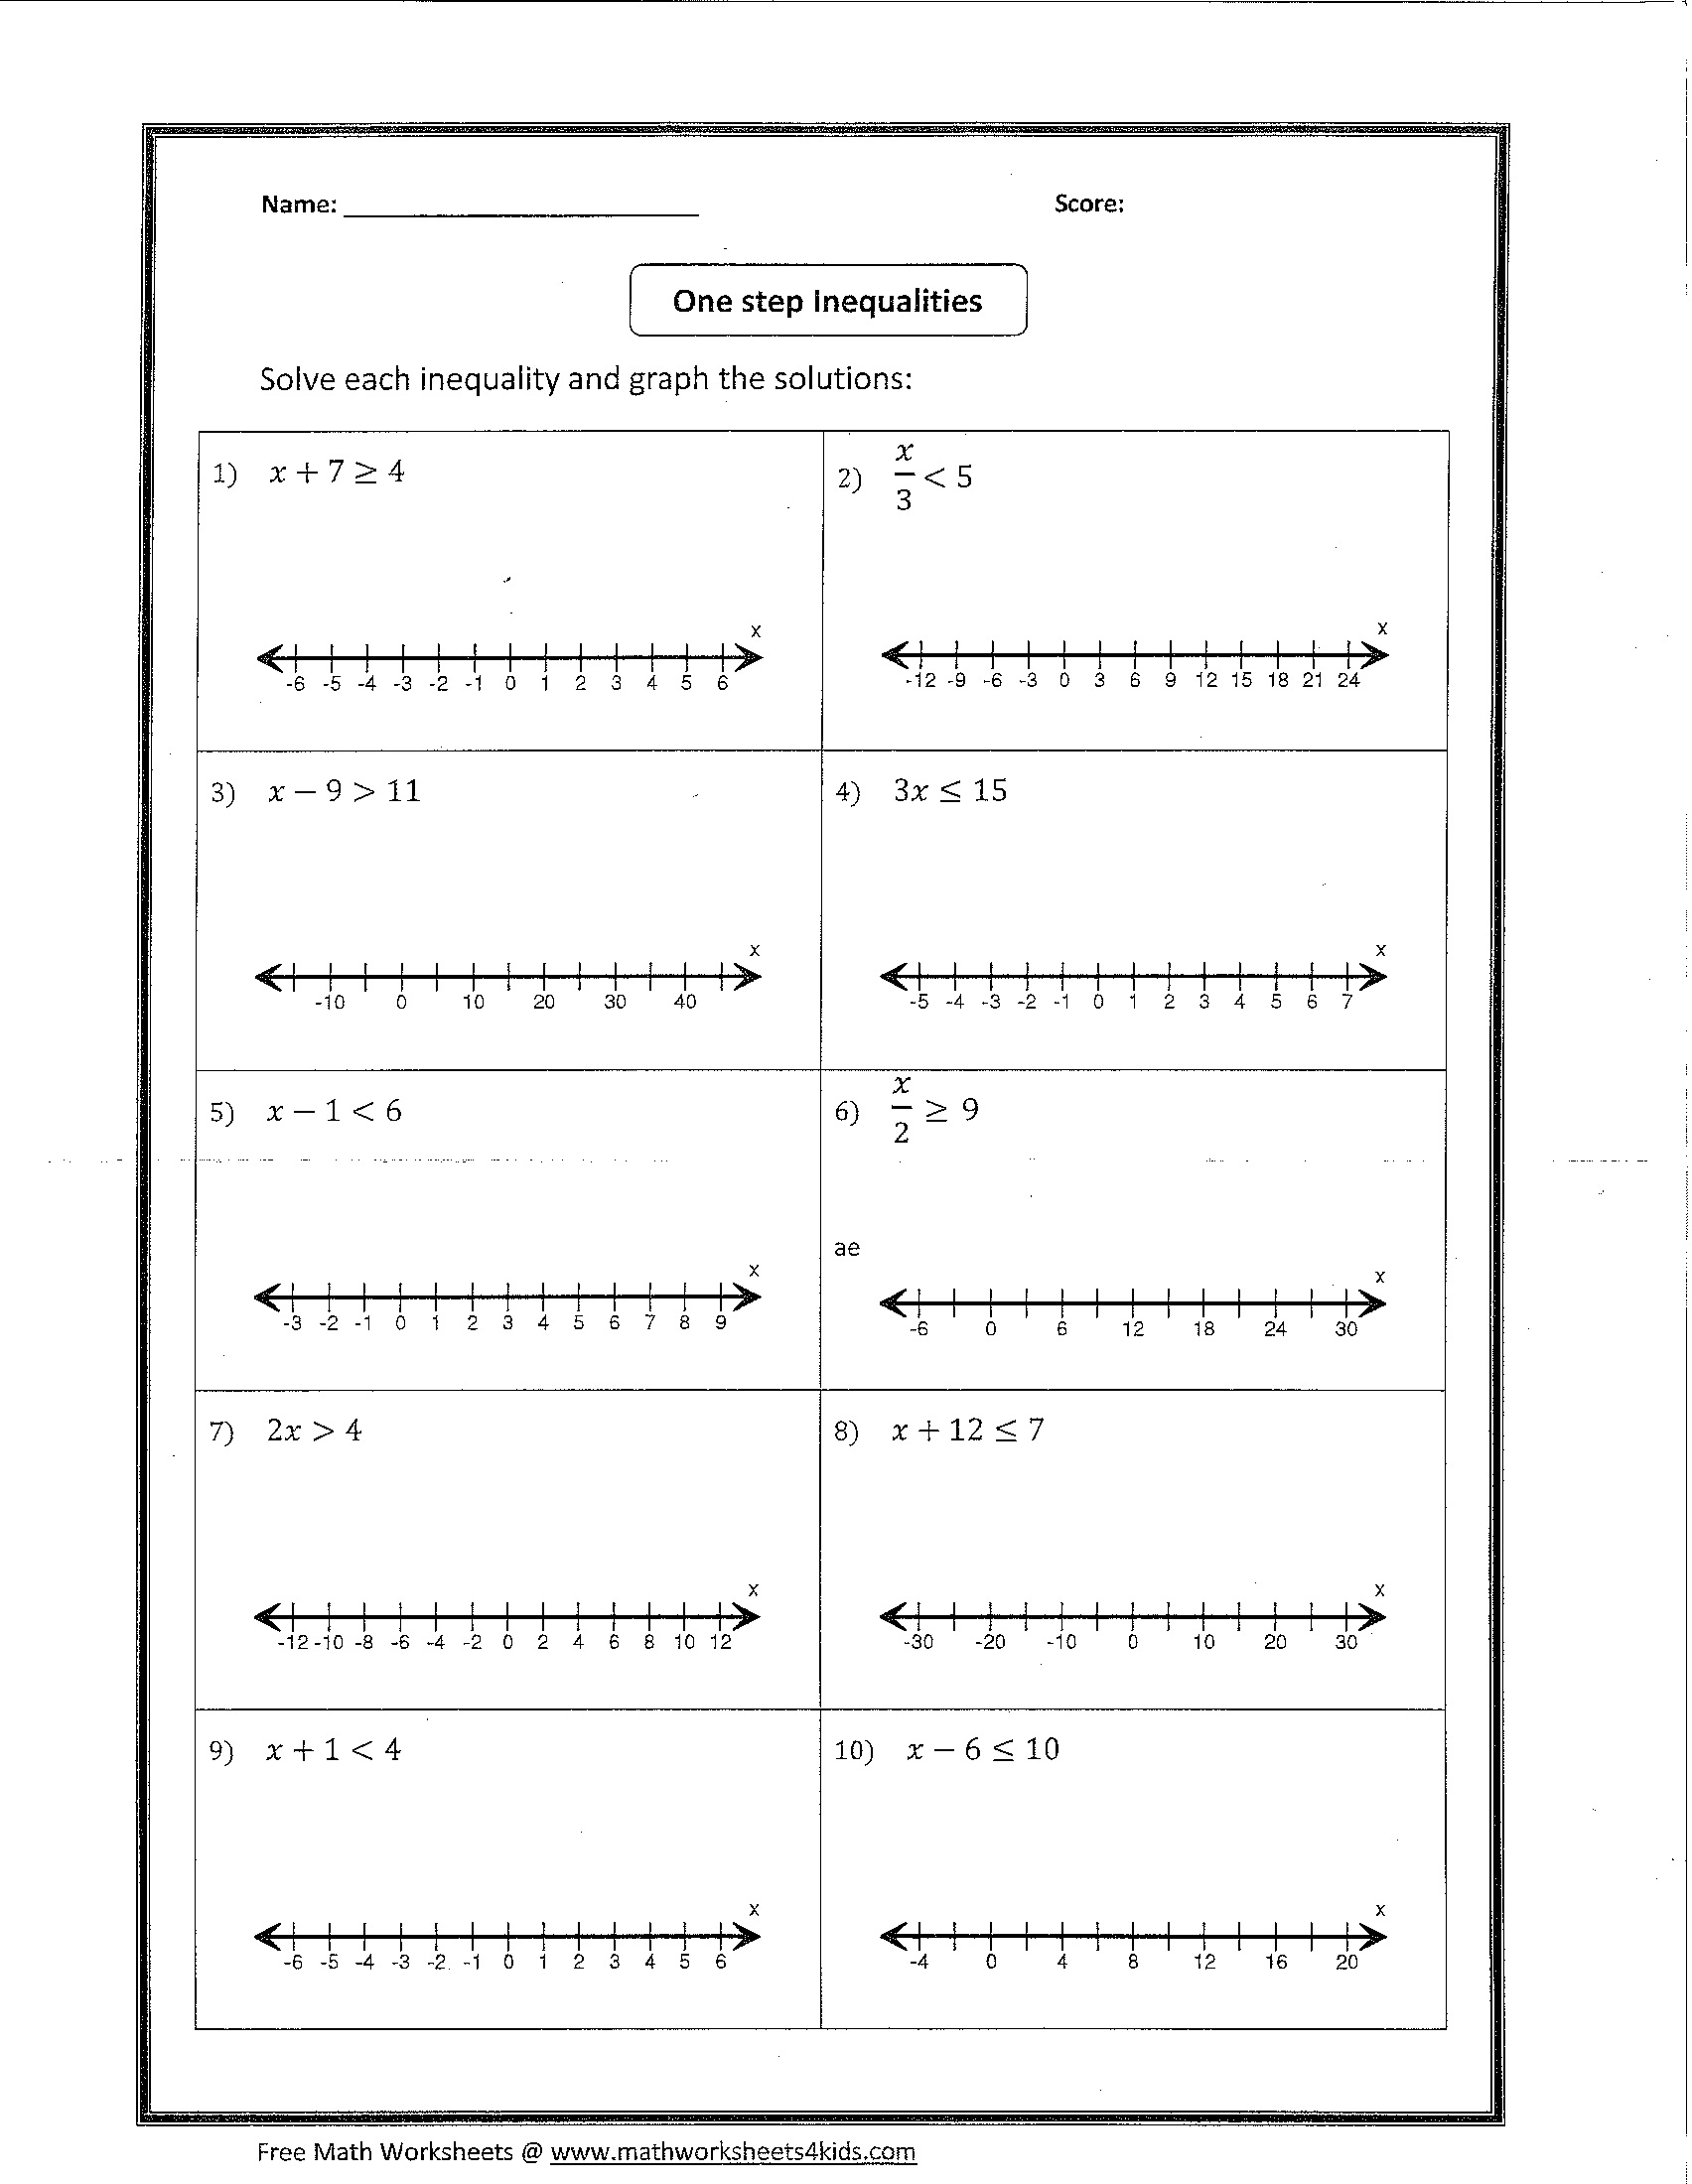 solving-and-graphing-one-step-inequalities-worksheet